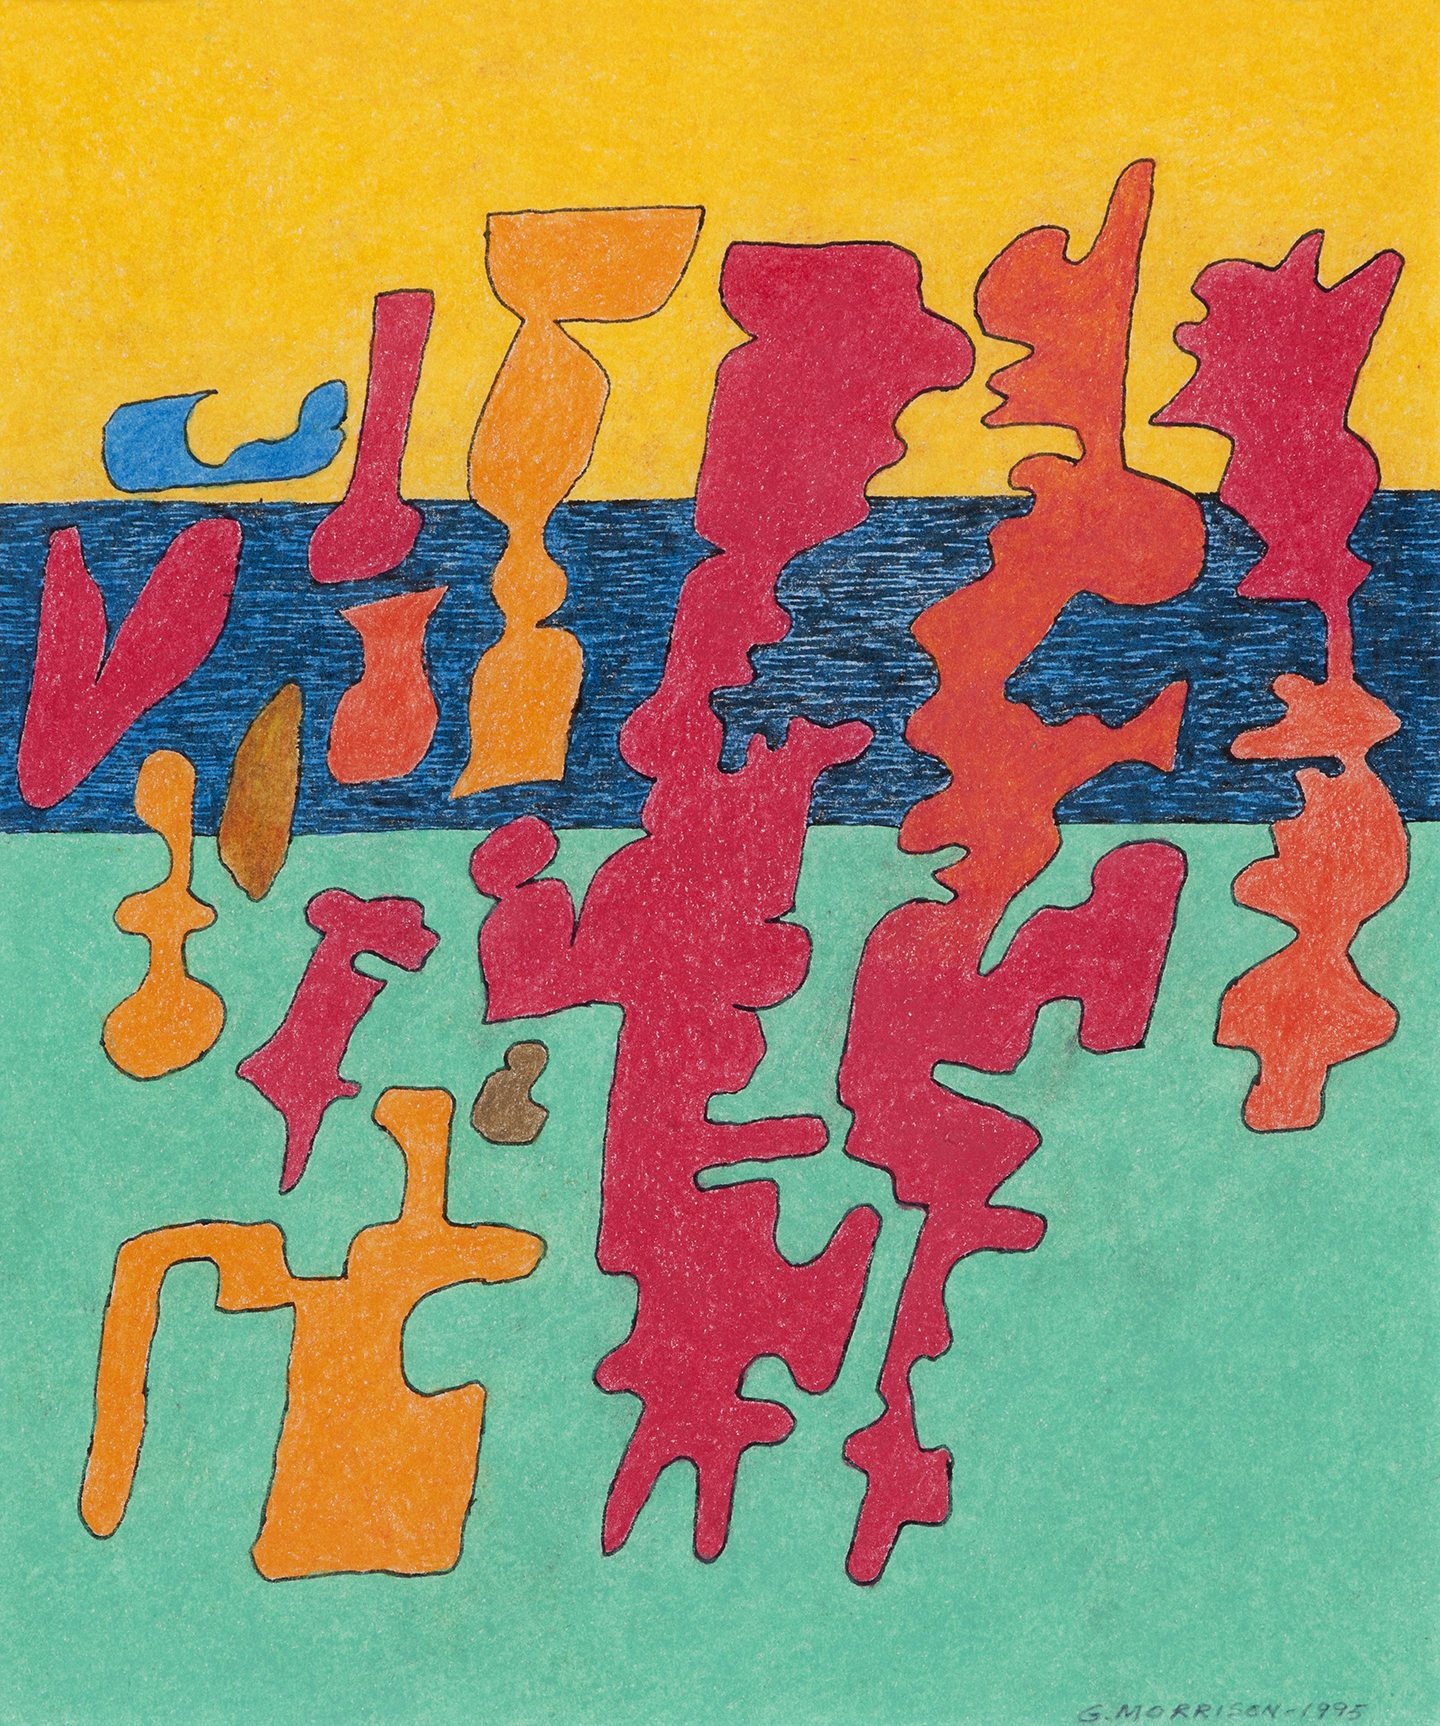 Untitled, 1995
color pencil and ink on paper
9.6 x 8 inches
